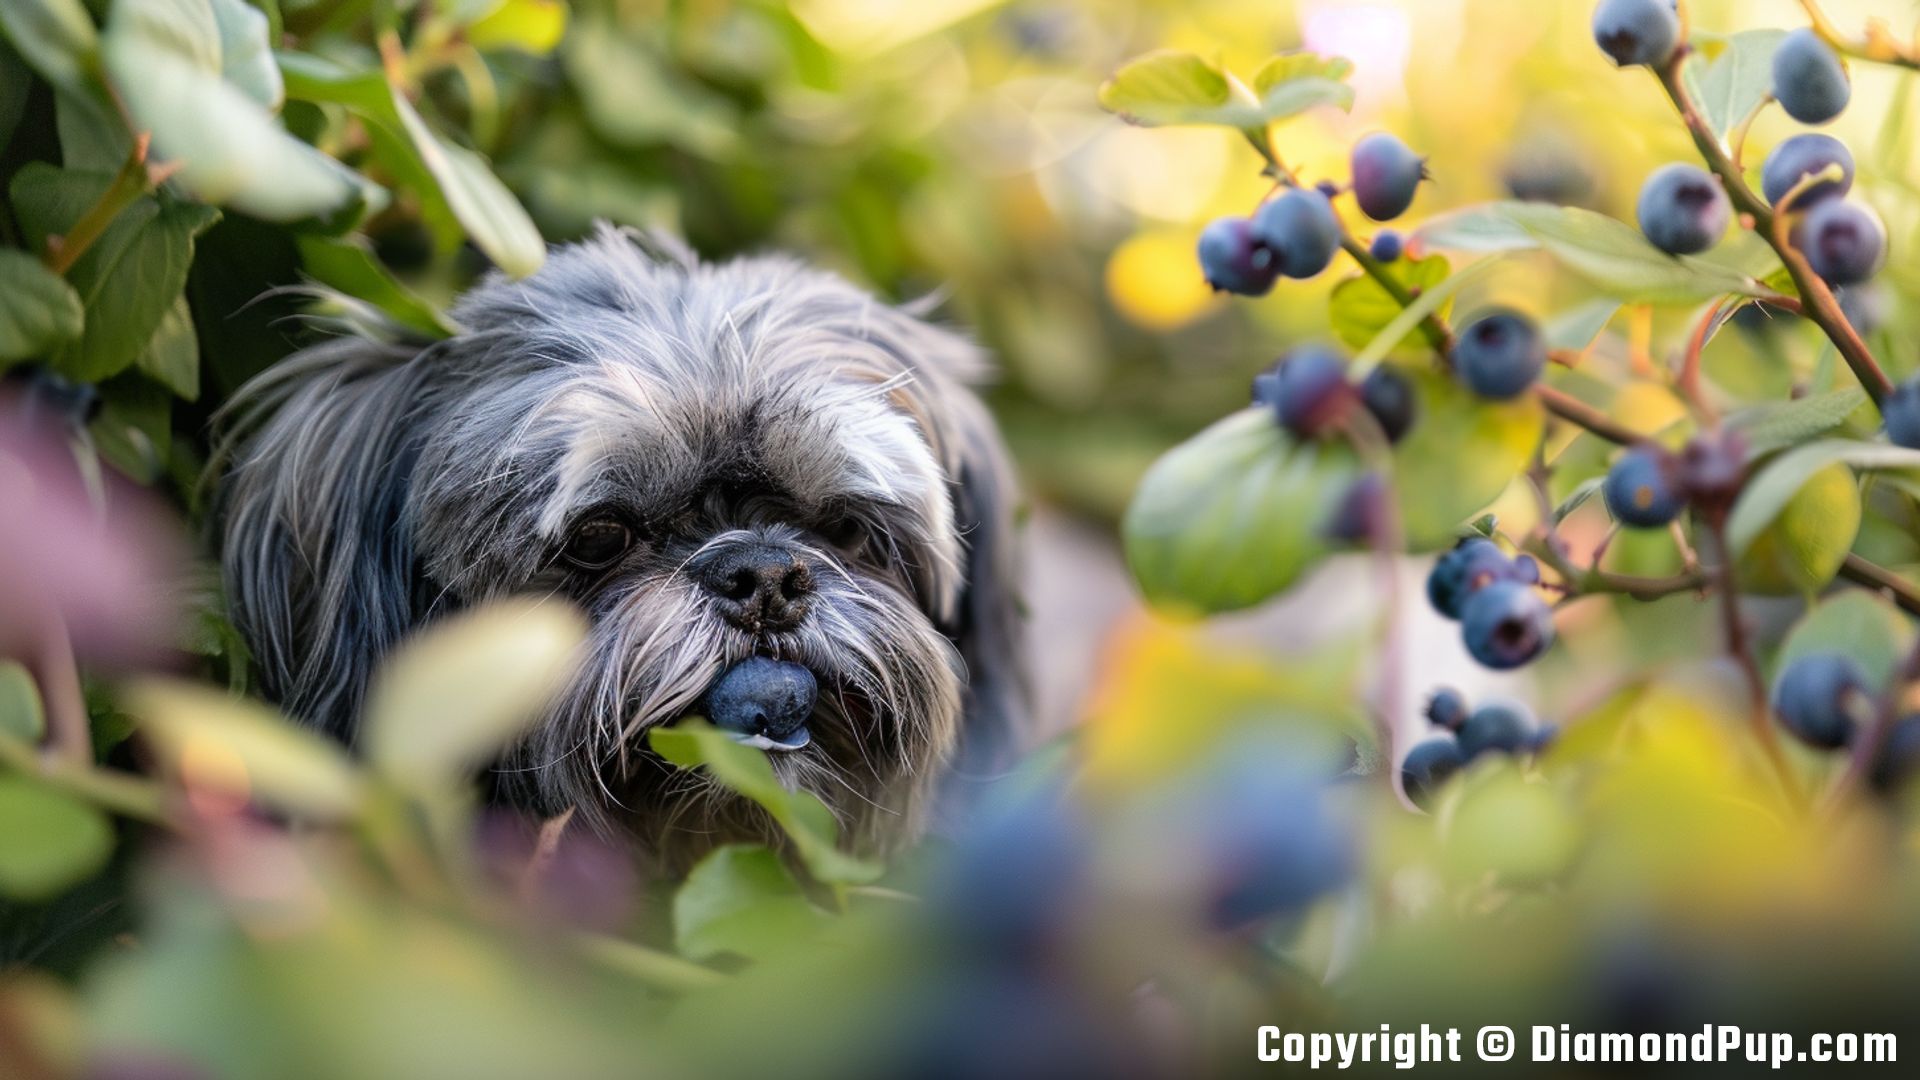 Photograph of a Cute Shih Tzu Eating Blueberries